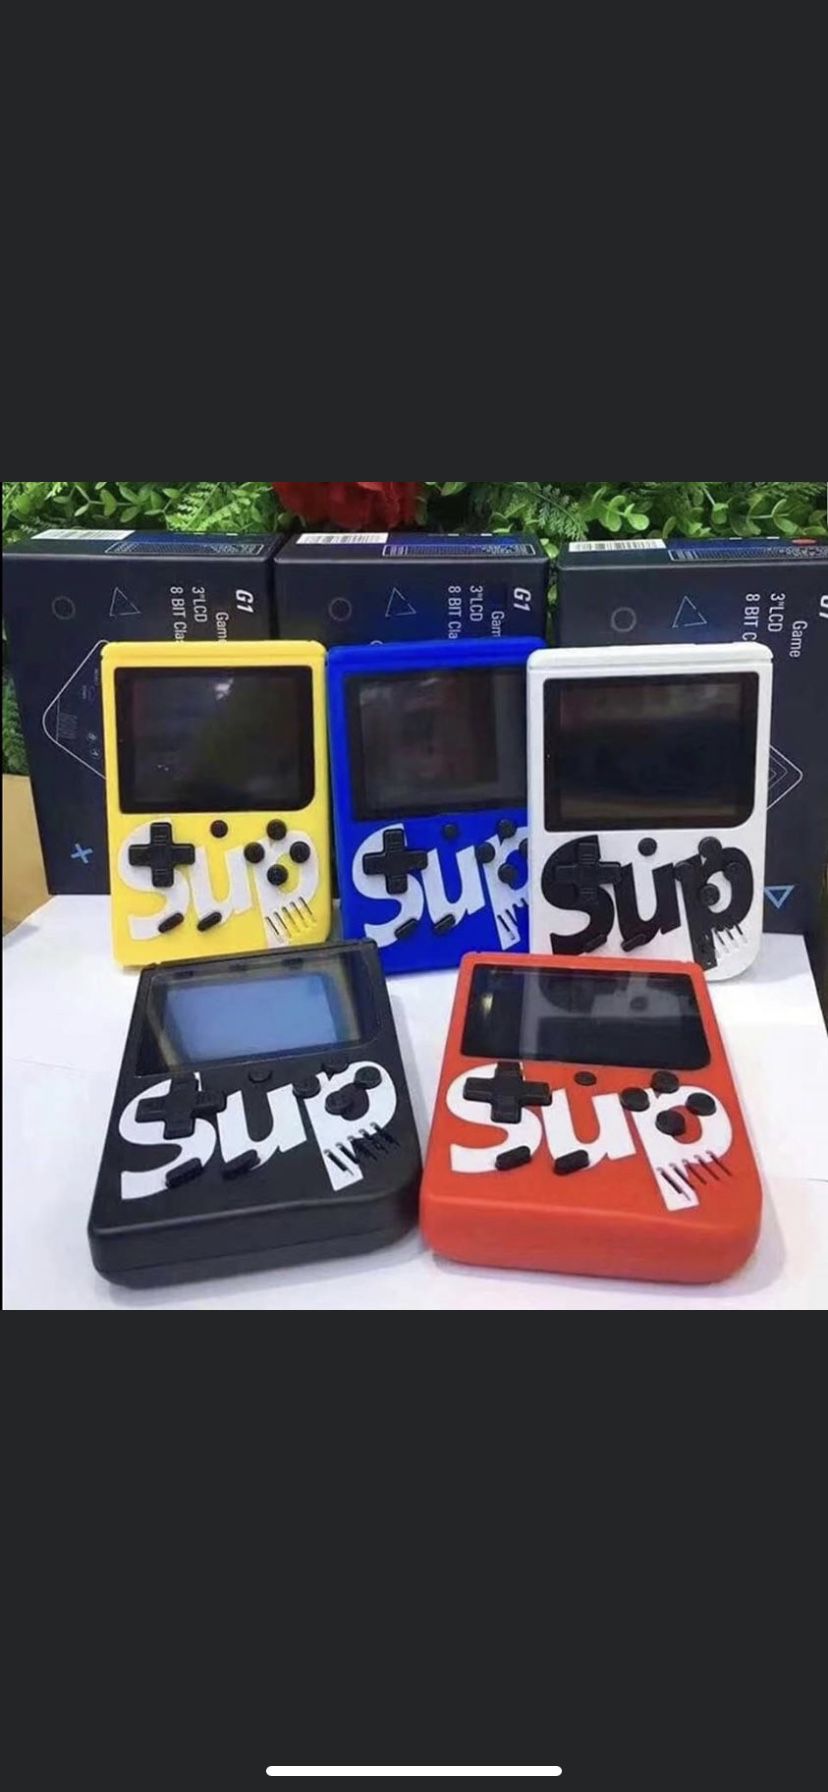 Sup game device